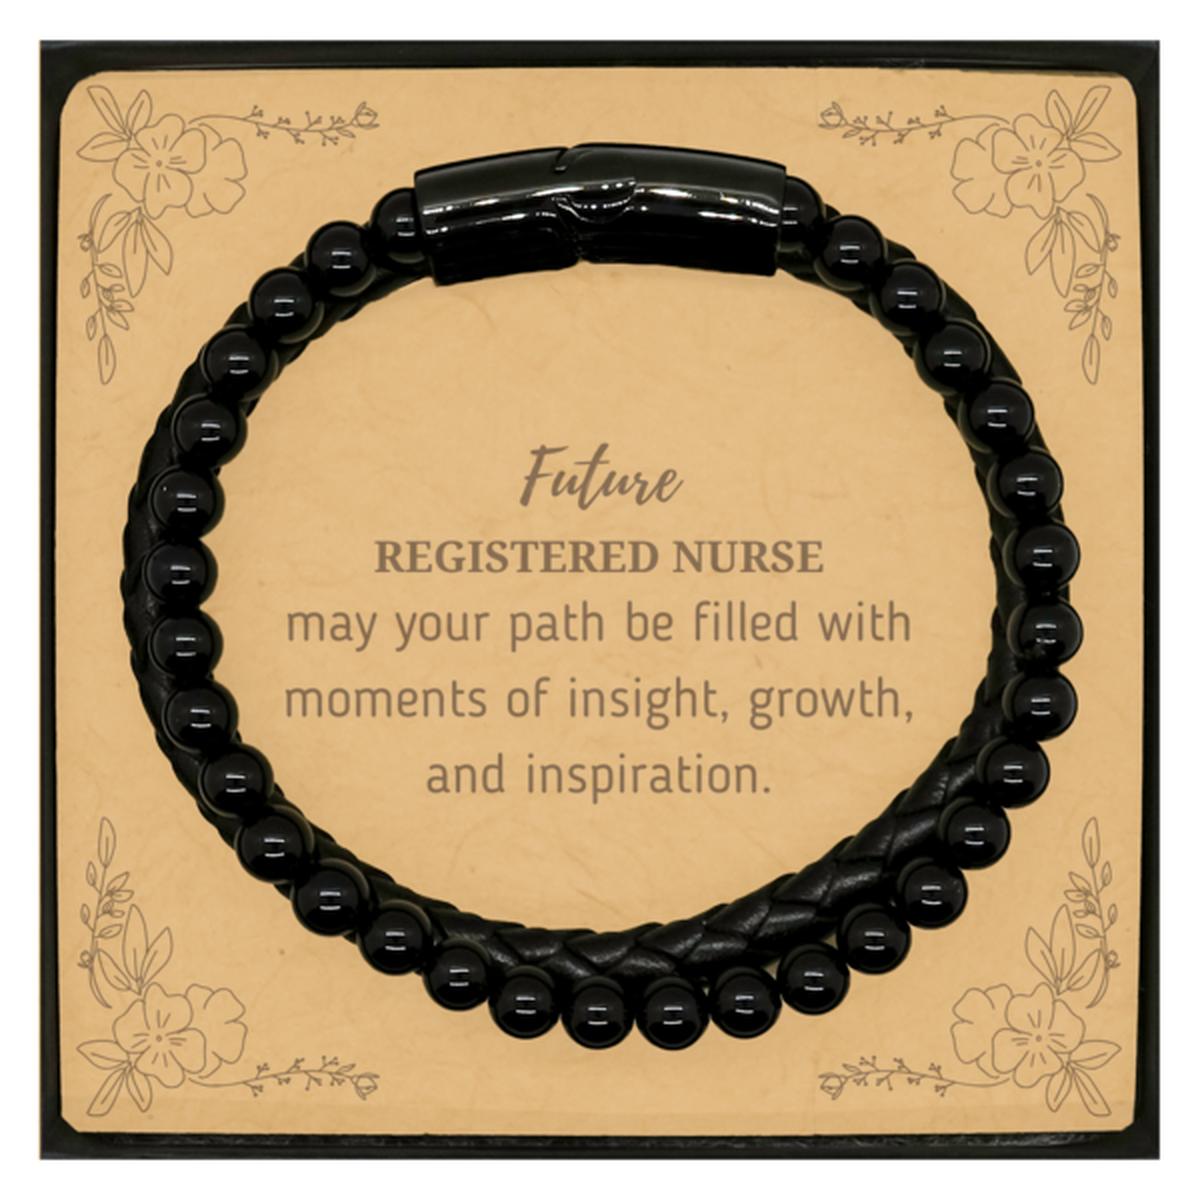 Future Registered Nurse Gifts, May your path be filled with moments of insight, Graduation Gifts for New Registered Nurse, Christmas Unique Stone Leather Bracelets For Men, Women, Friends